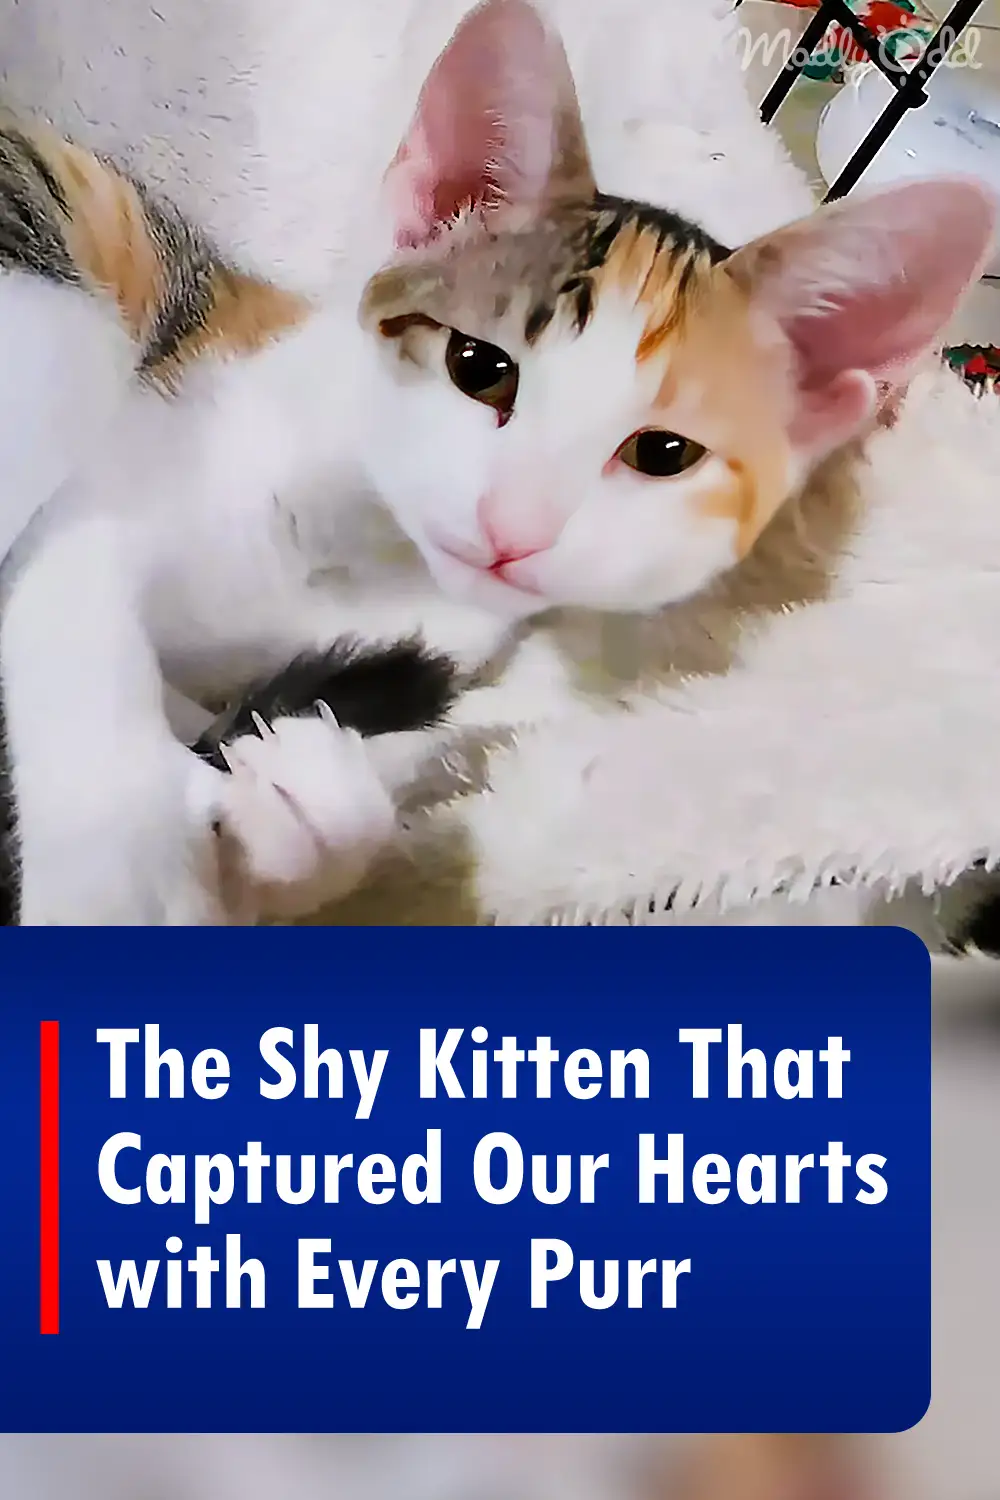 The Shy Kitten That Captured Our Hearts with Every Purr